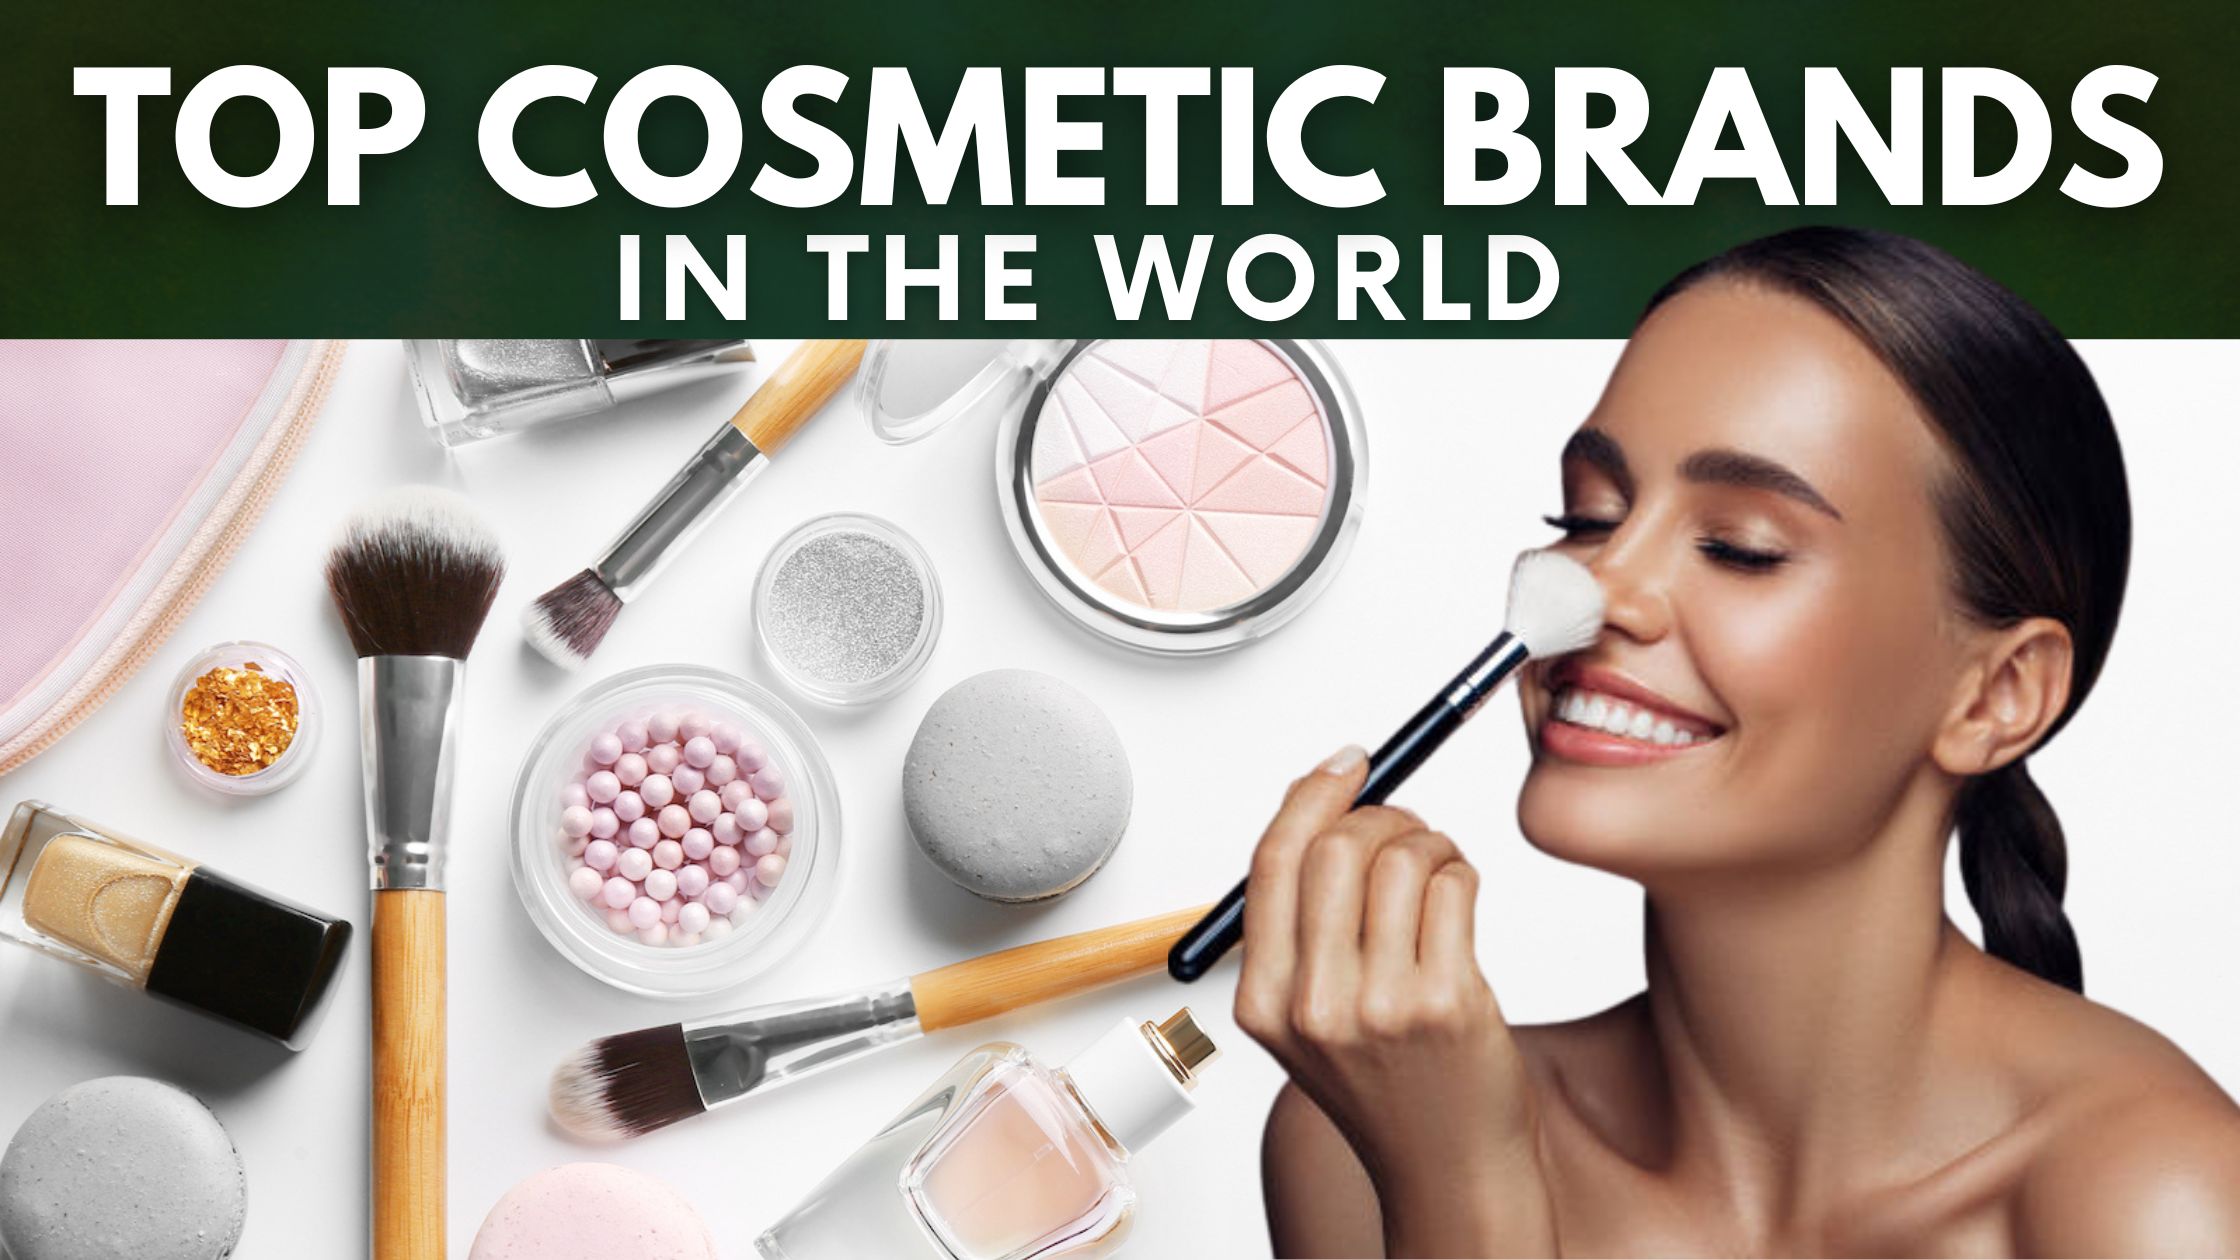 Top 10 Cosmetic Brands in the World (2022)